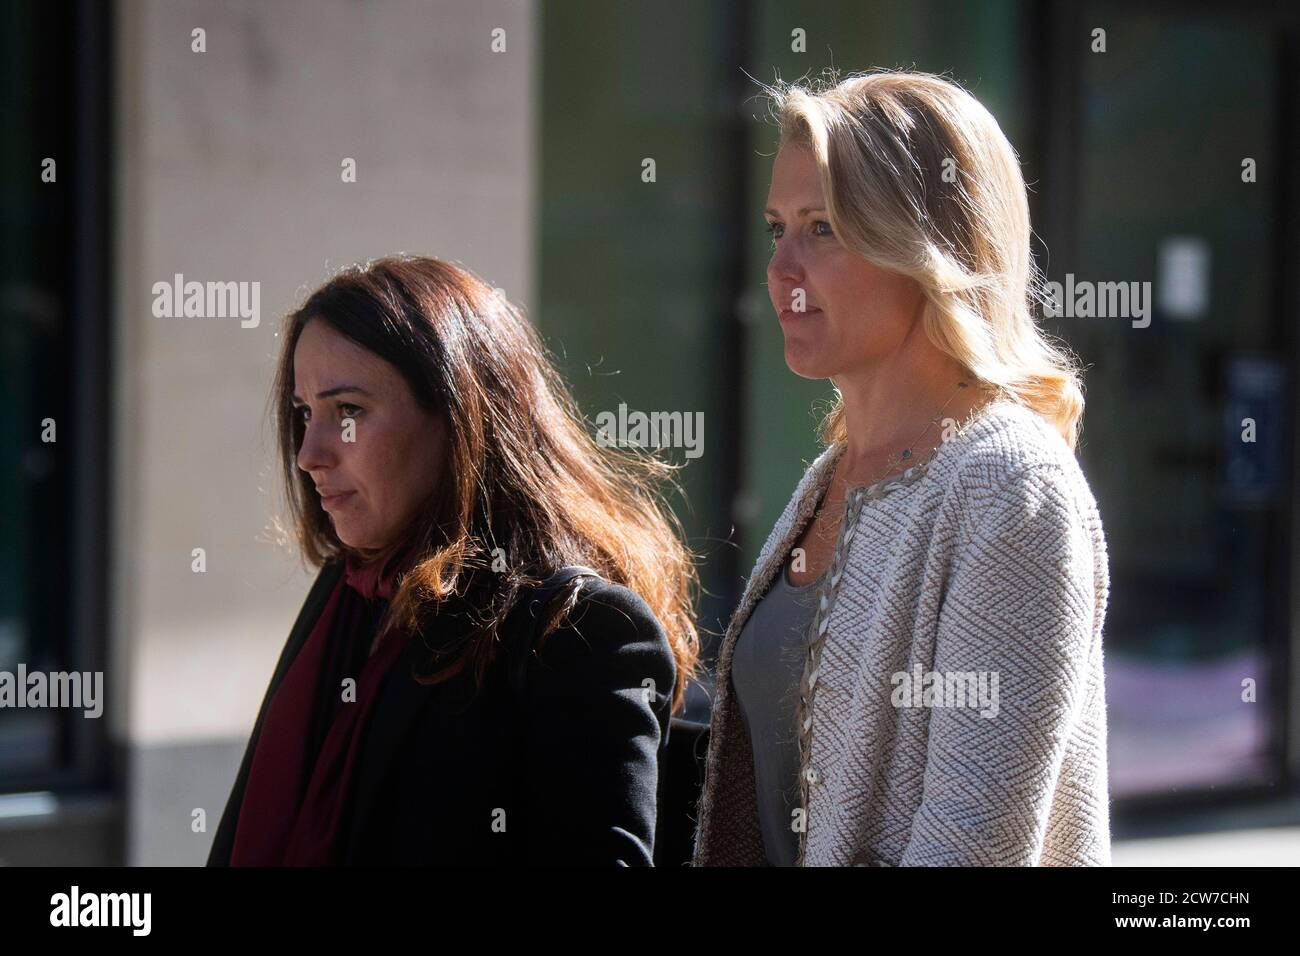 Stella Moris (left), the partner of Wikileaks founder Julian Assange, and human rights lawyer Jennifer Robinson outside the Old Bailey in London as the hearing in Assange's battle against extradition to the US continues. The WikiLeaks founder is fighting extradition to the US on charges relating to leaks of classified documents allegedly exposing war crimes and abuse. Stock Photo